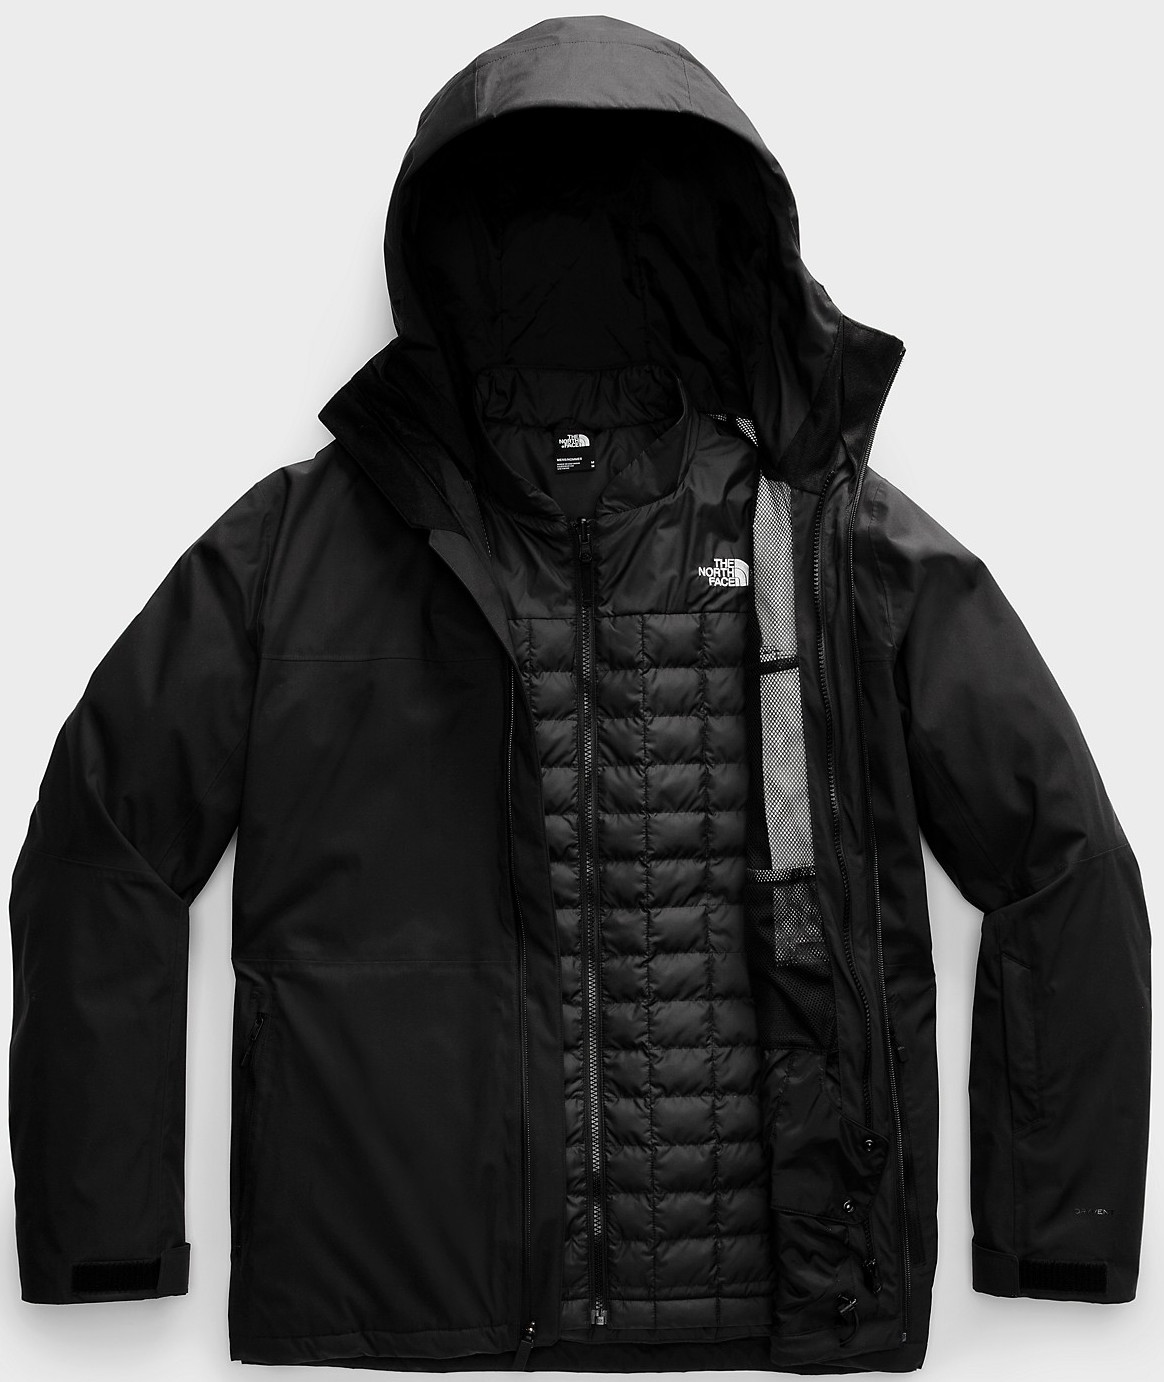 Unlock Wilderness' choice in the Helly Hansen Vs North Face comparison, the ThermoBall™ Eco Snow Triclimate® Jacket by North Face